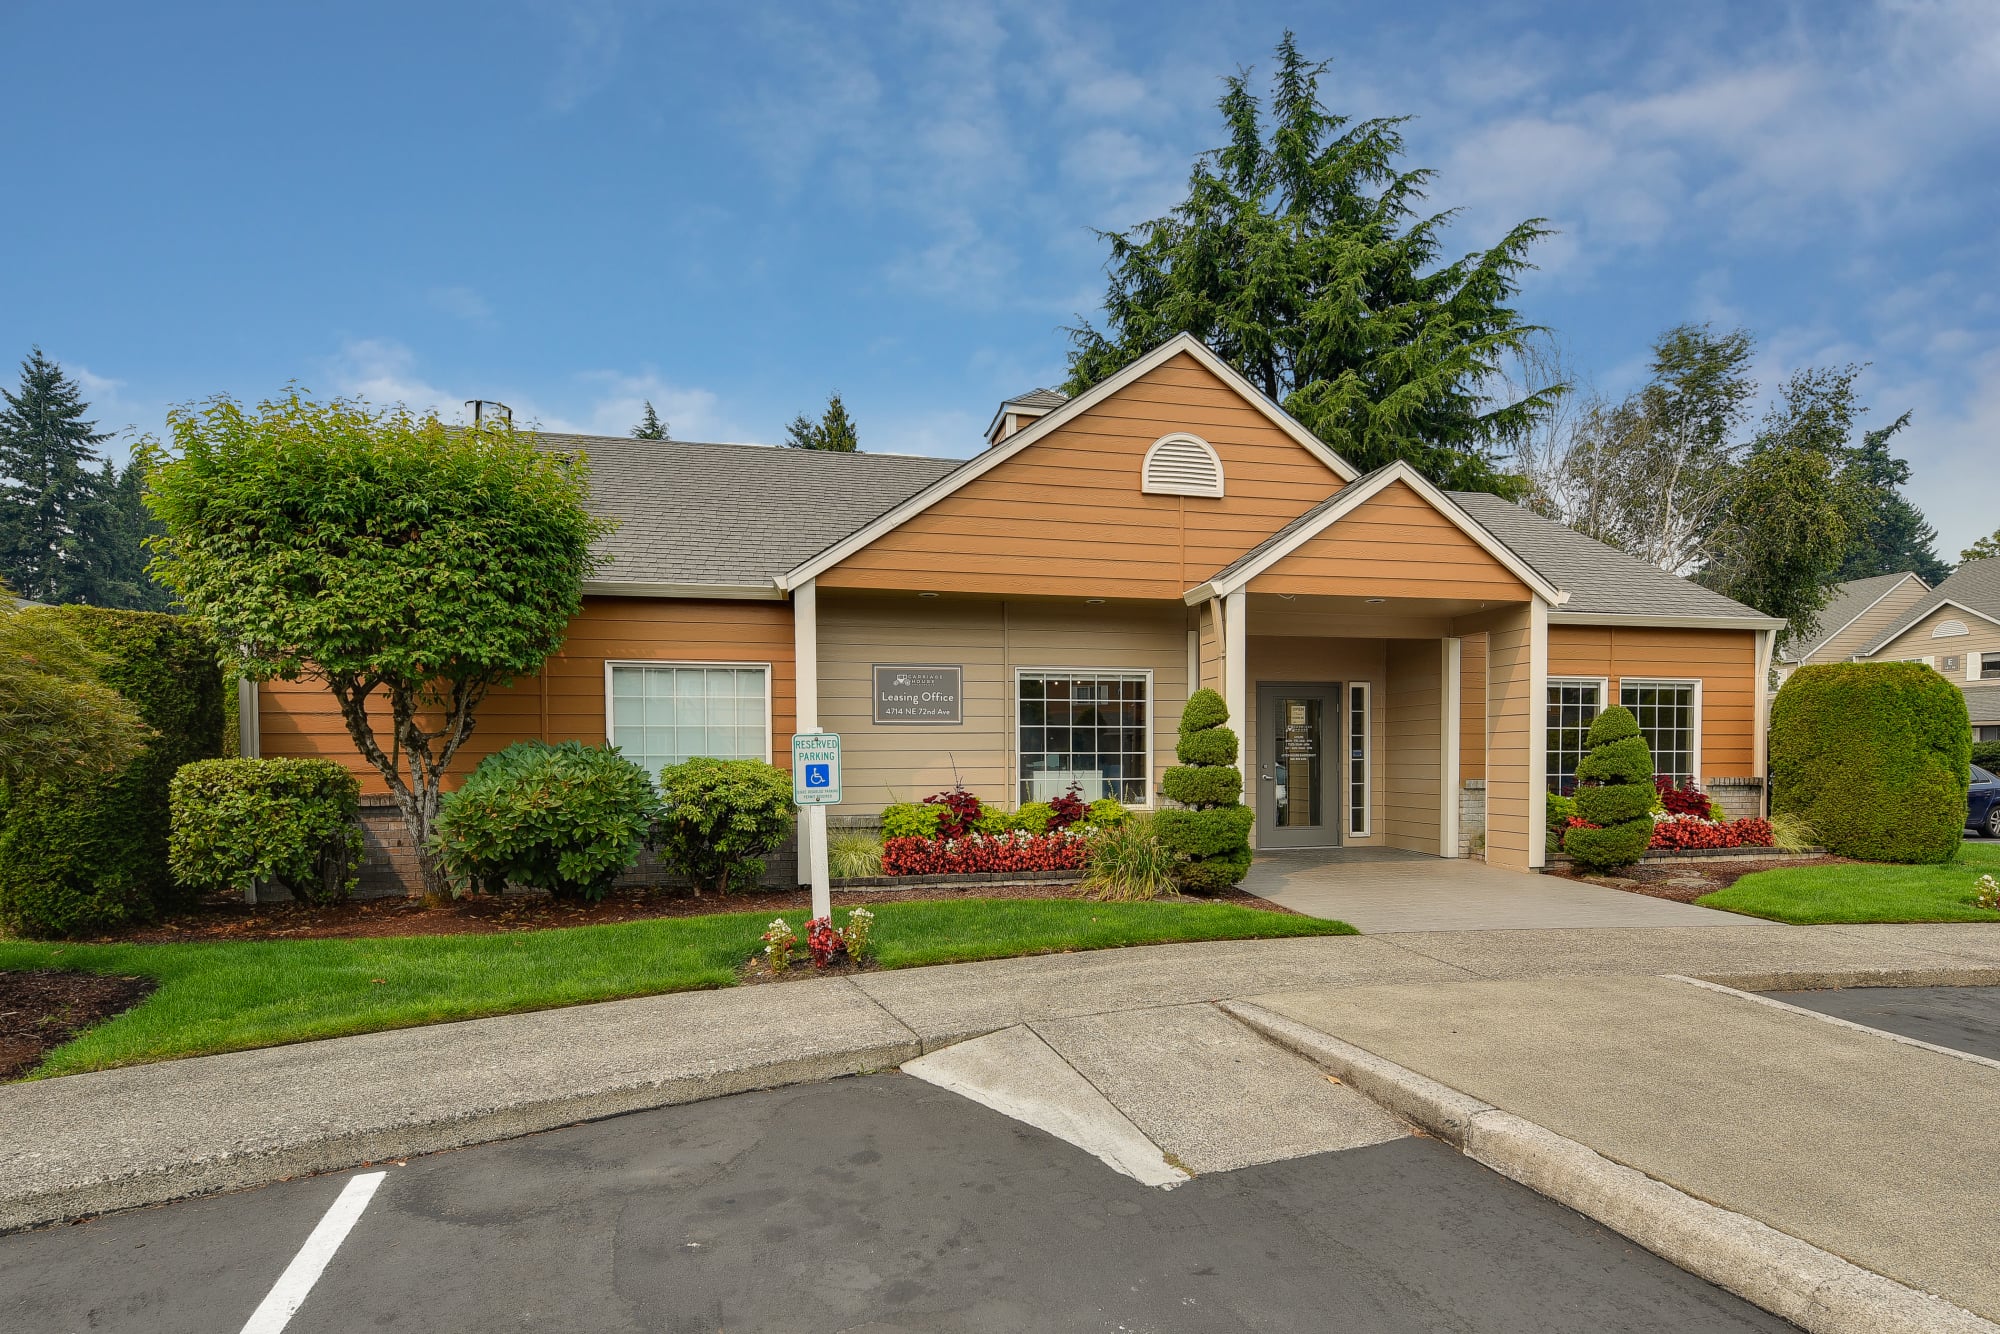 The exterior of the leasing office at Carriage House Apartments in Vancouver, Washington